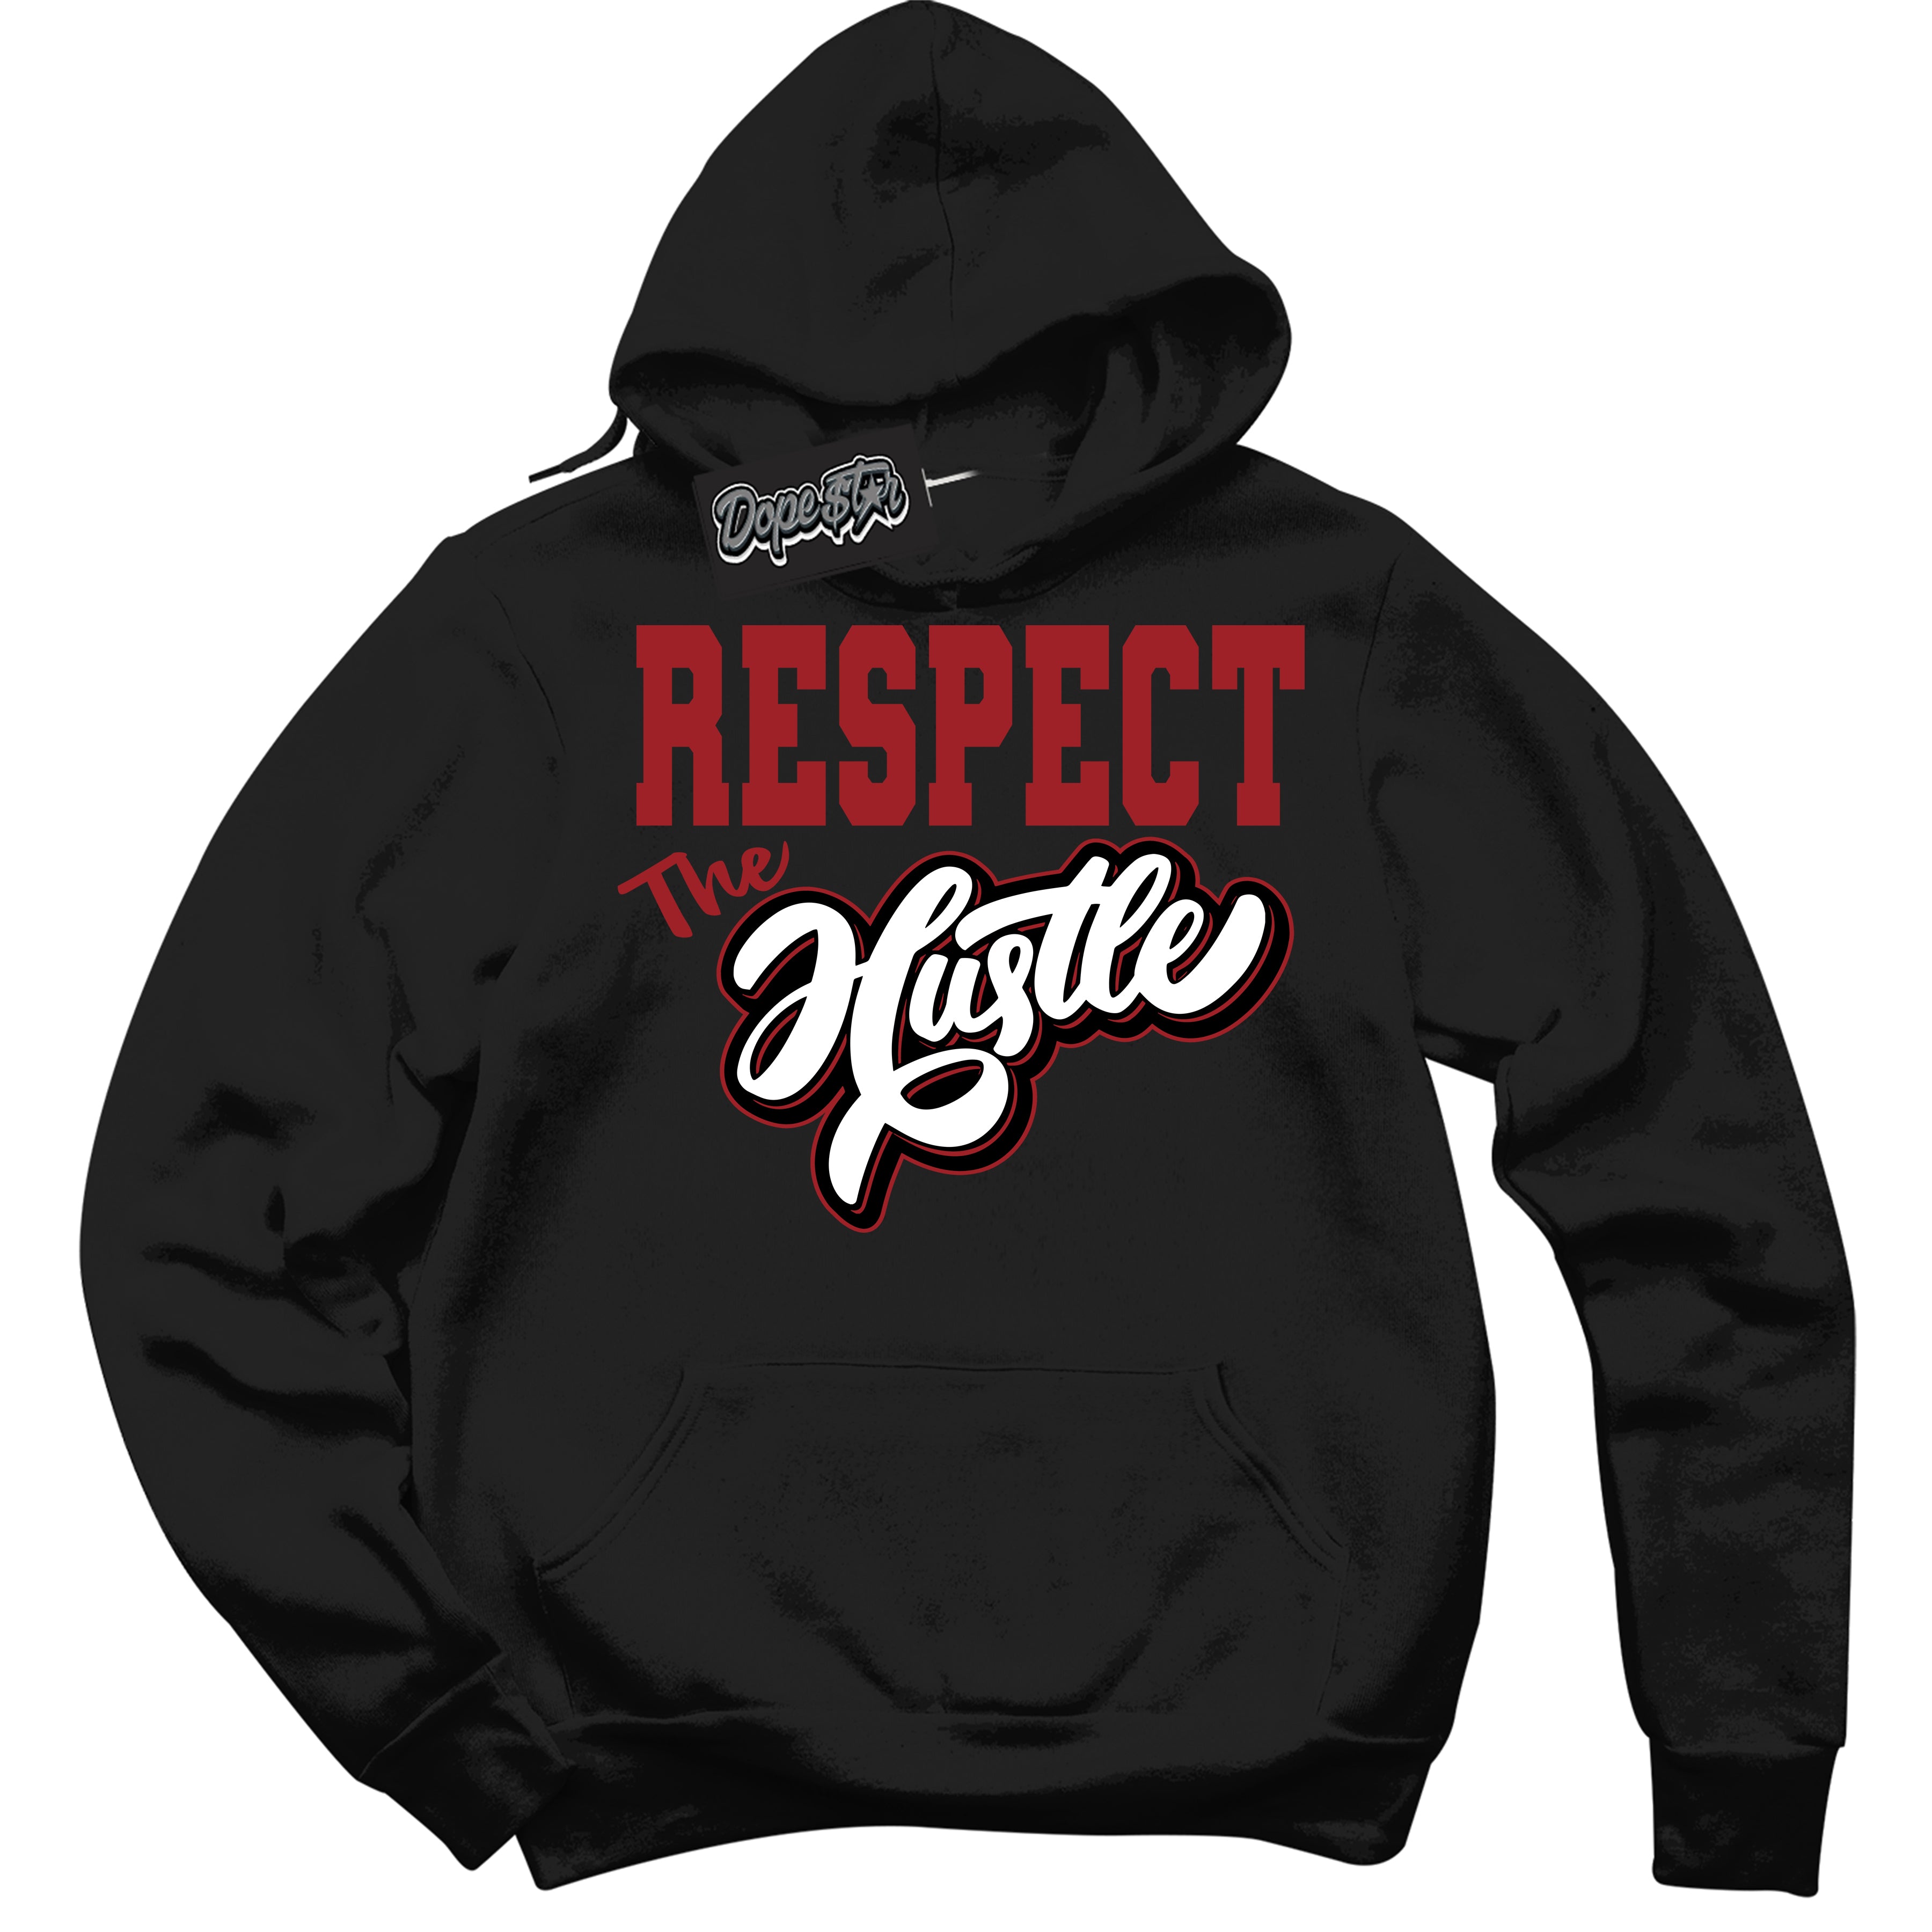 Cool Black Hoodie With “ Respect The Hustle “ Design That Perfectly Matches Lost And Found 1s Sneakers